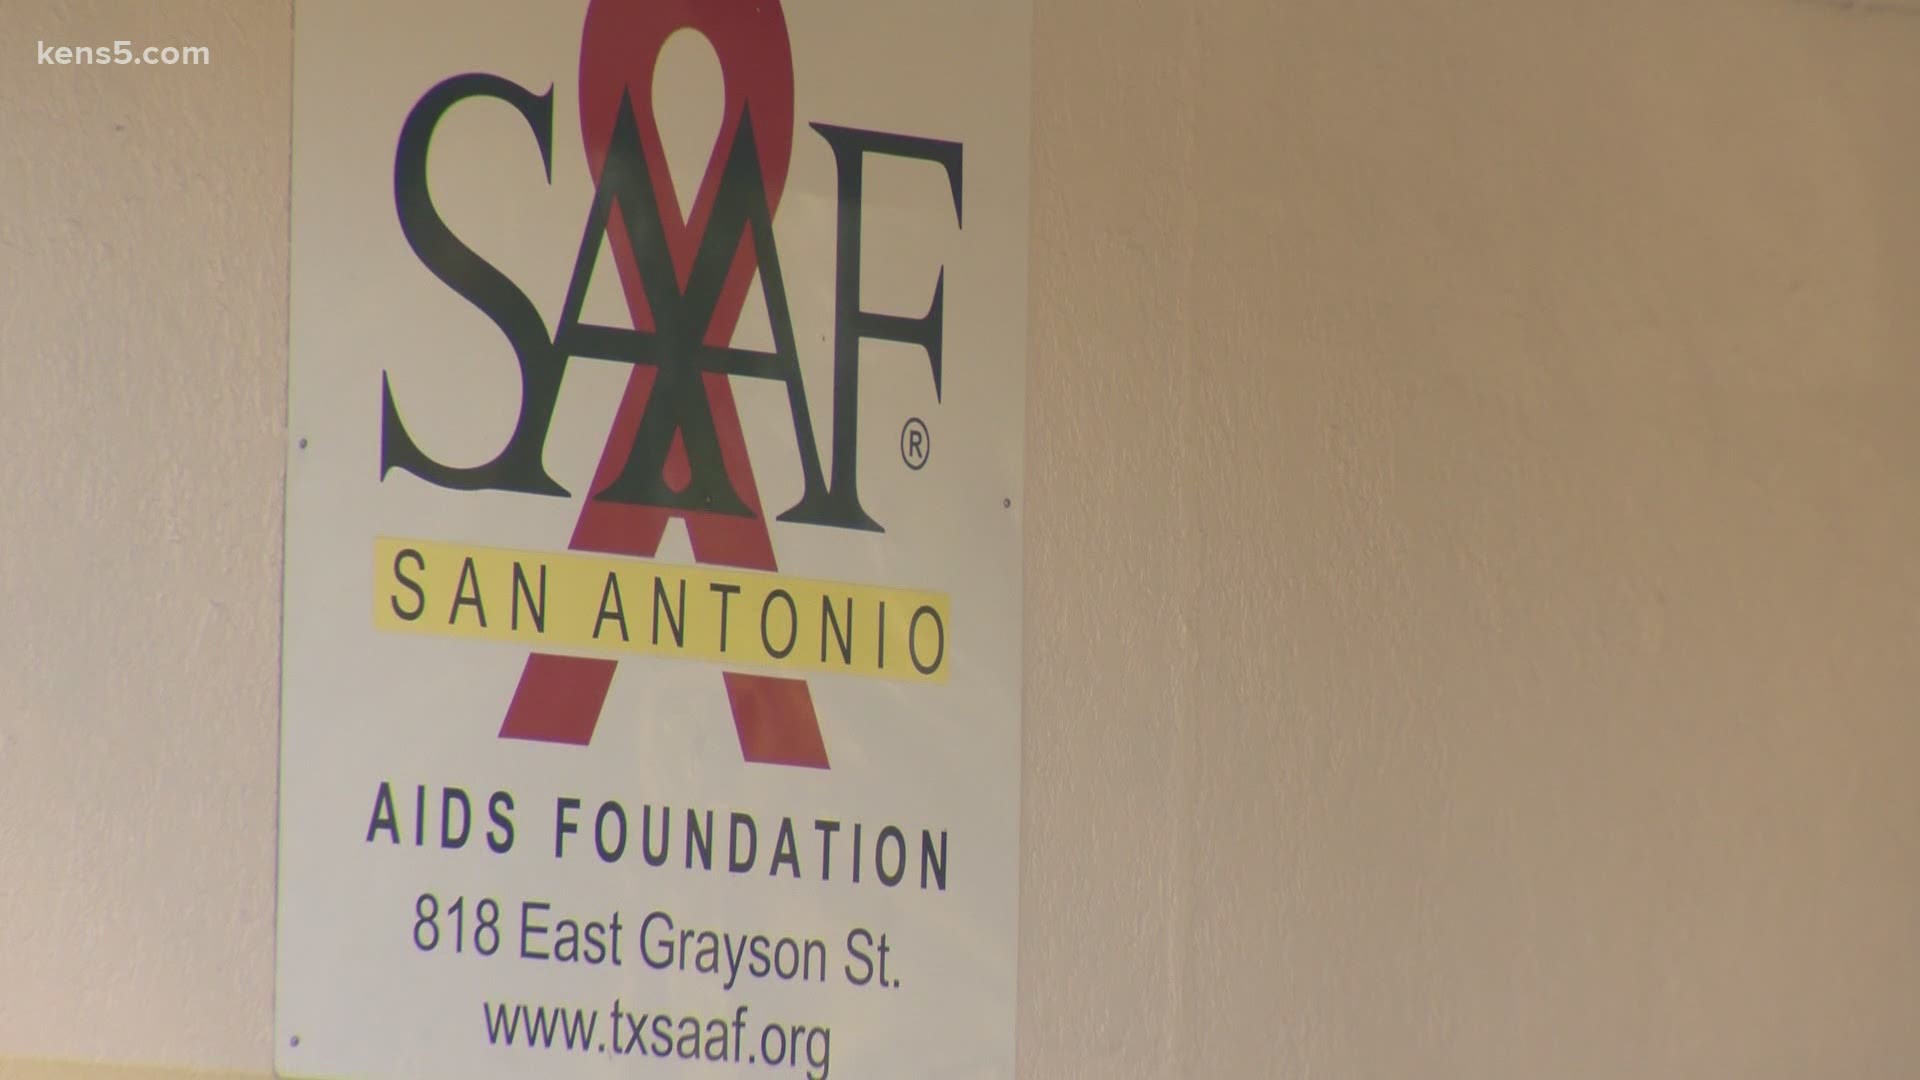 The pandemic has shut down some places for months at a time, including the San Antonio AIDS Foundation.